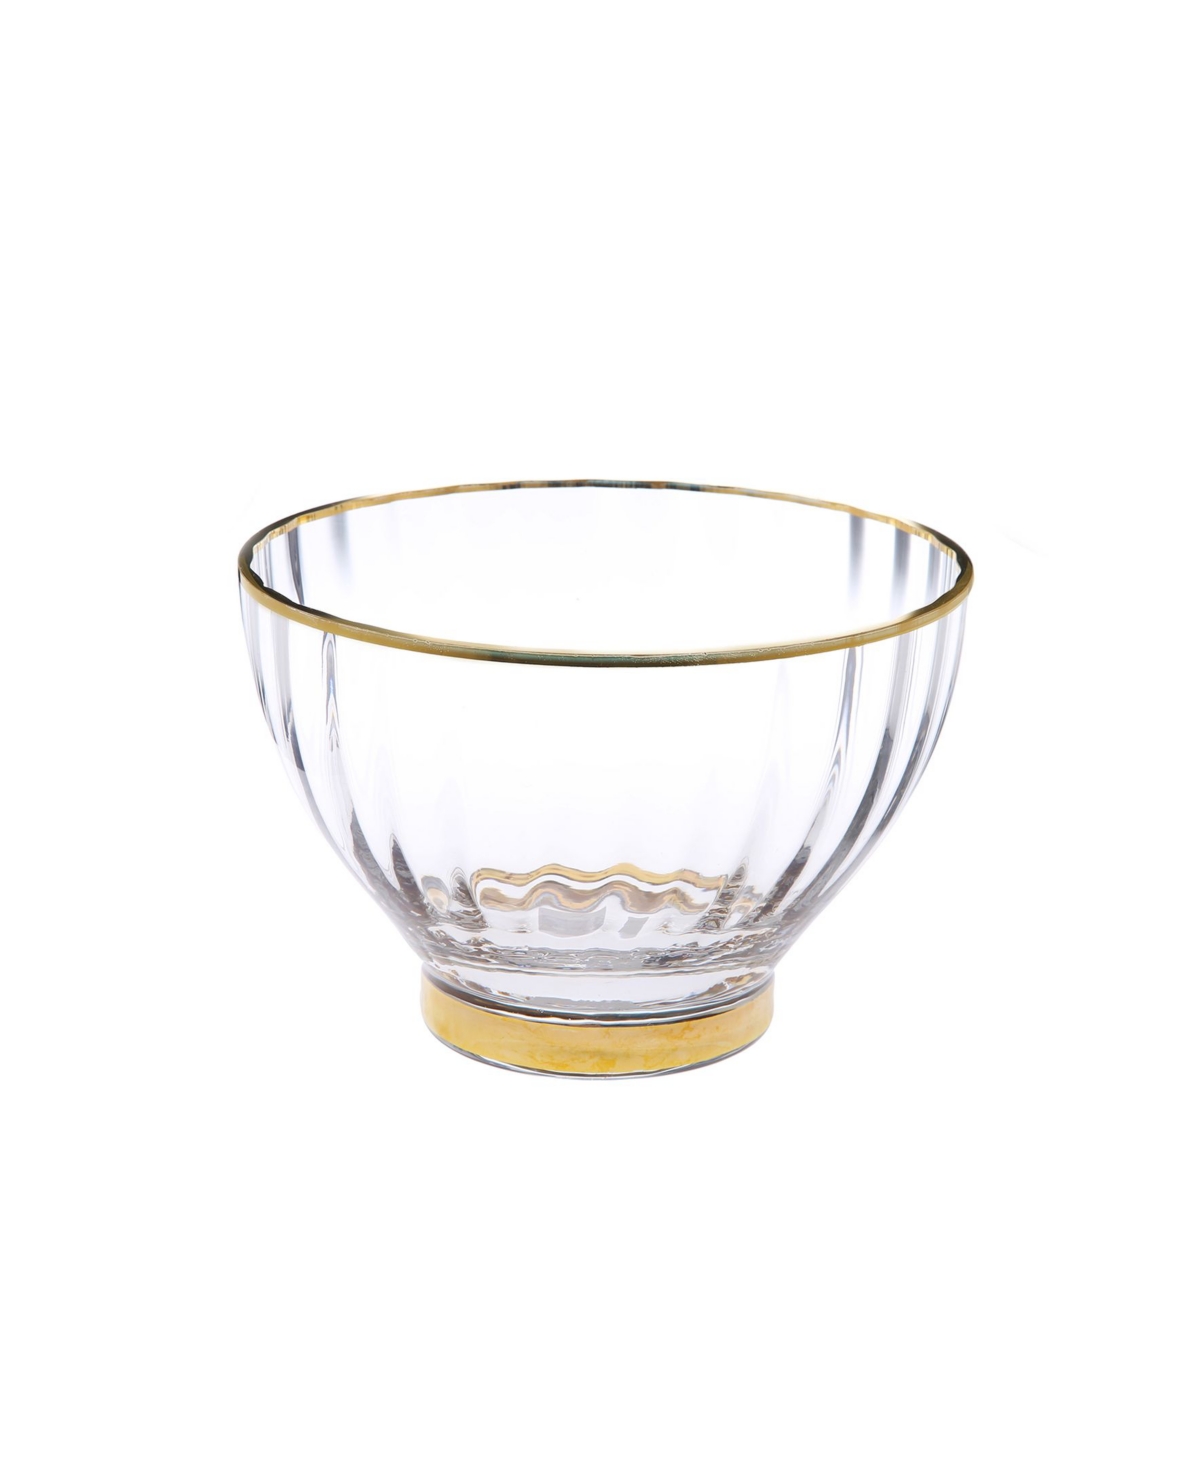 Set of 4 Straight Line Textured Dessert Bowls with Vivid Gold Tone Rim and Base - Clear